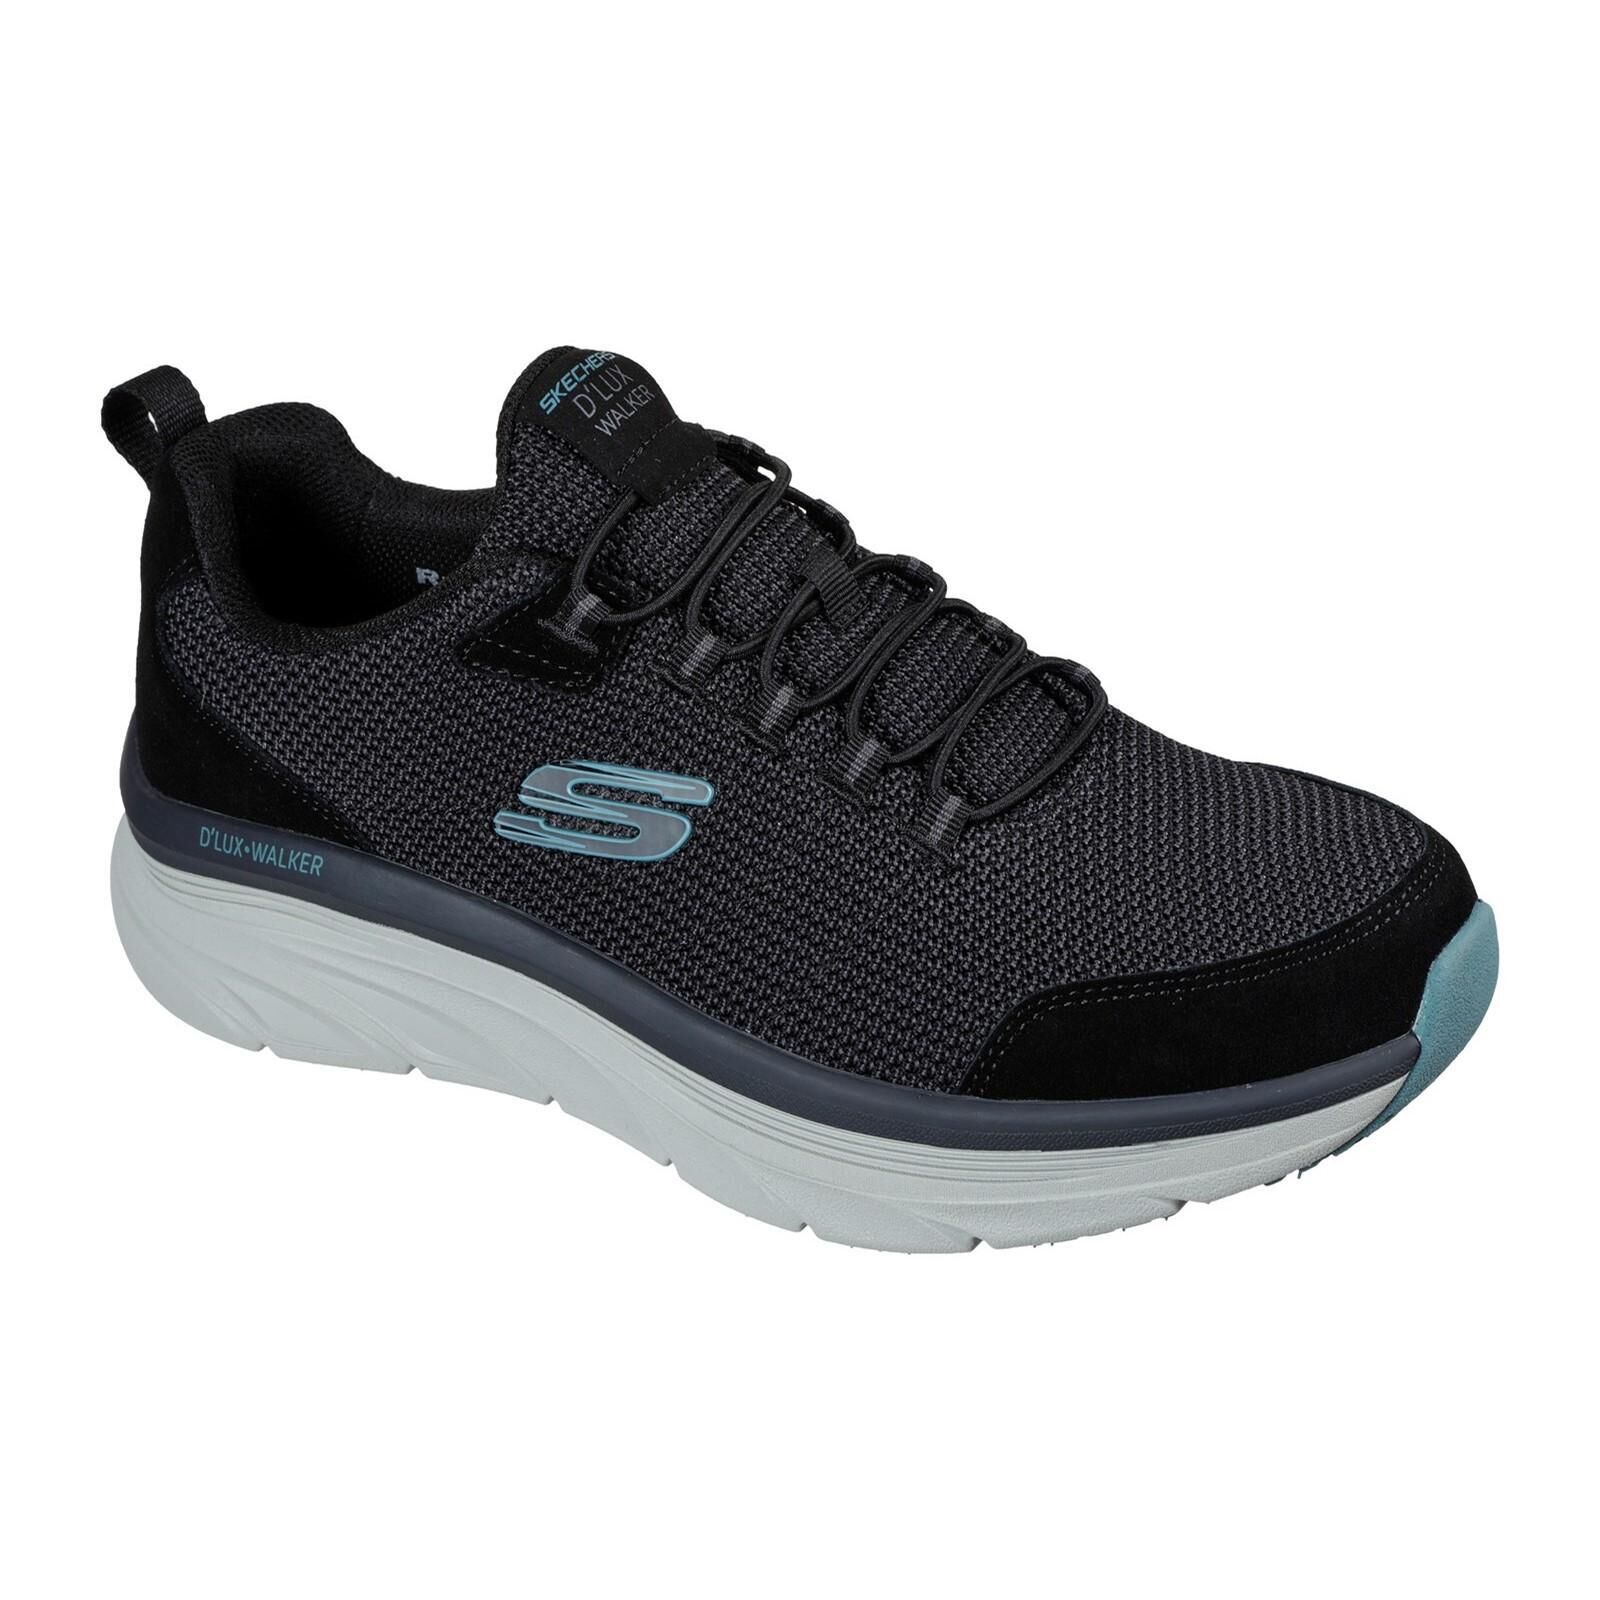 SKECHERS Mens D´Lux Walker Bersaga Leather Relaxed Fit Trainers (Black)